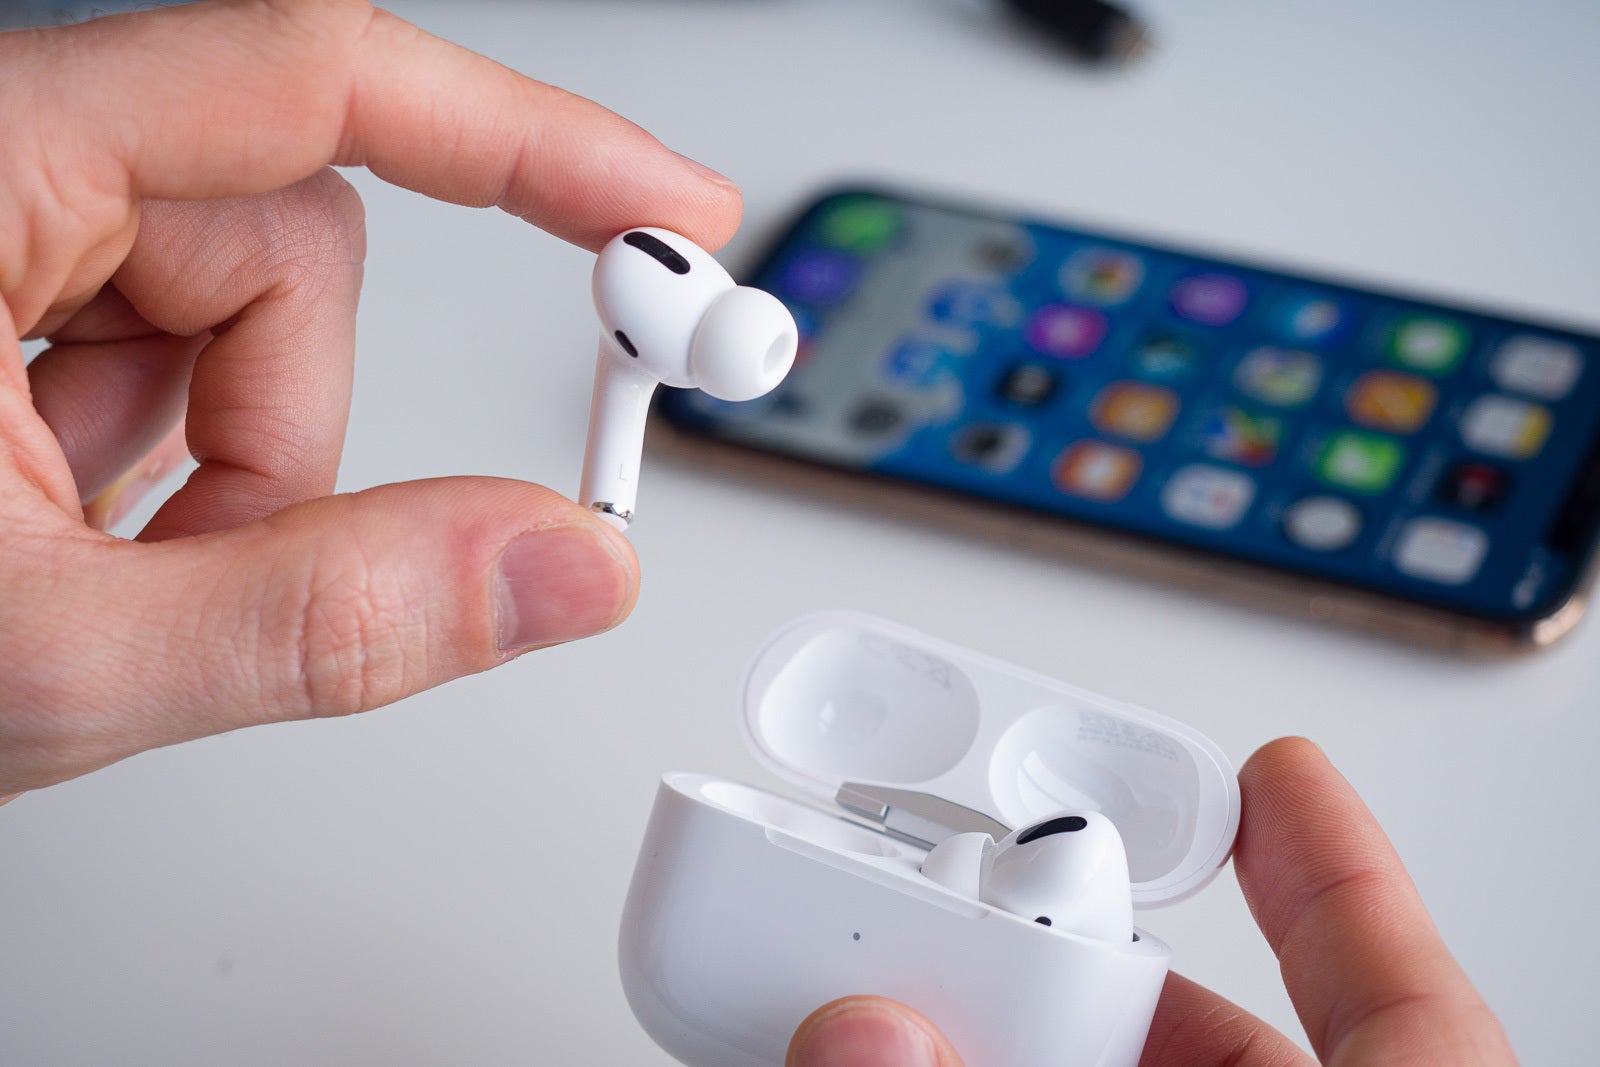 Apple AirPods Pro from 2019